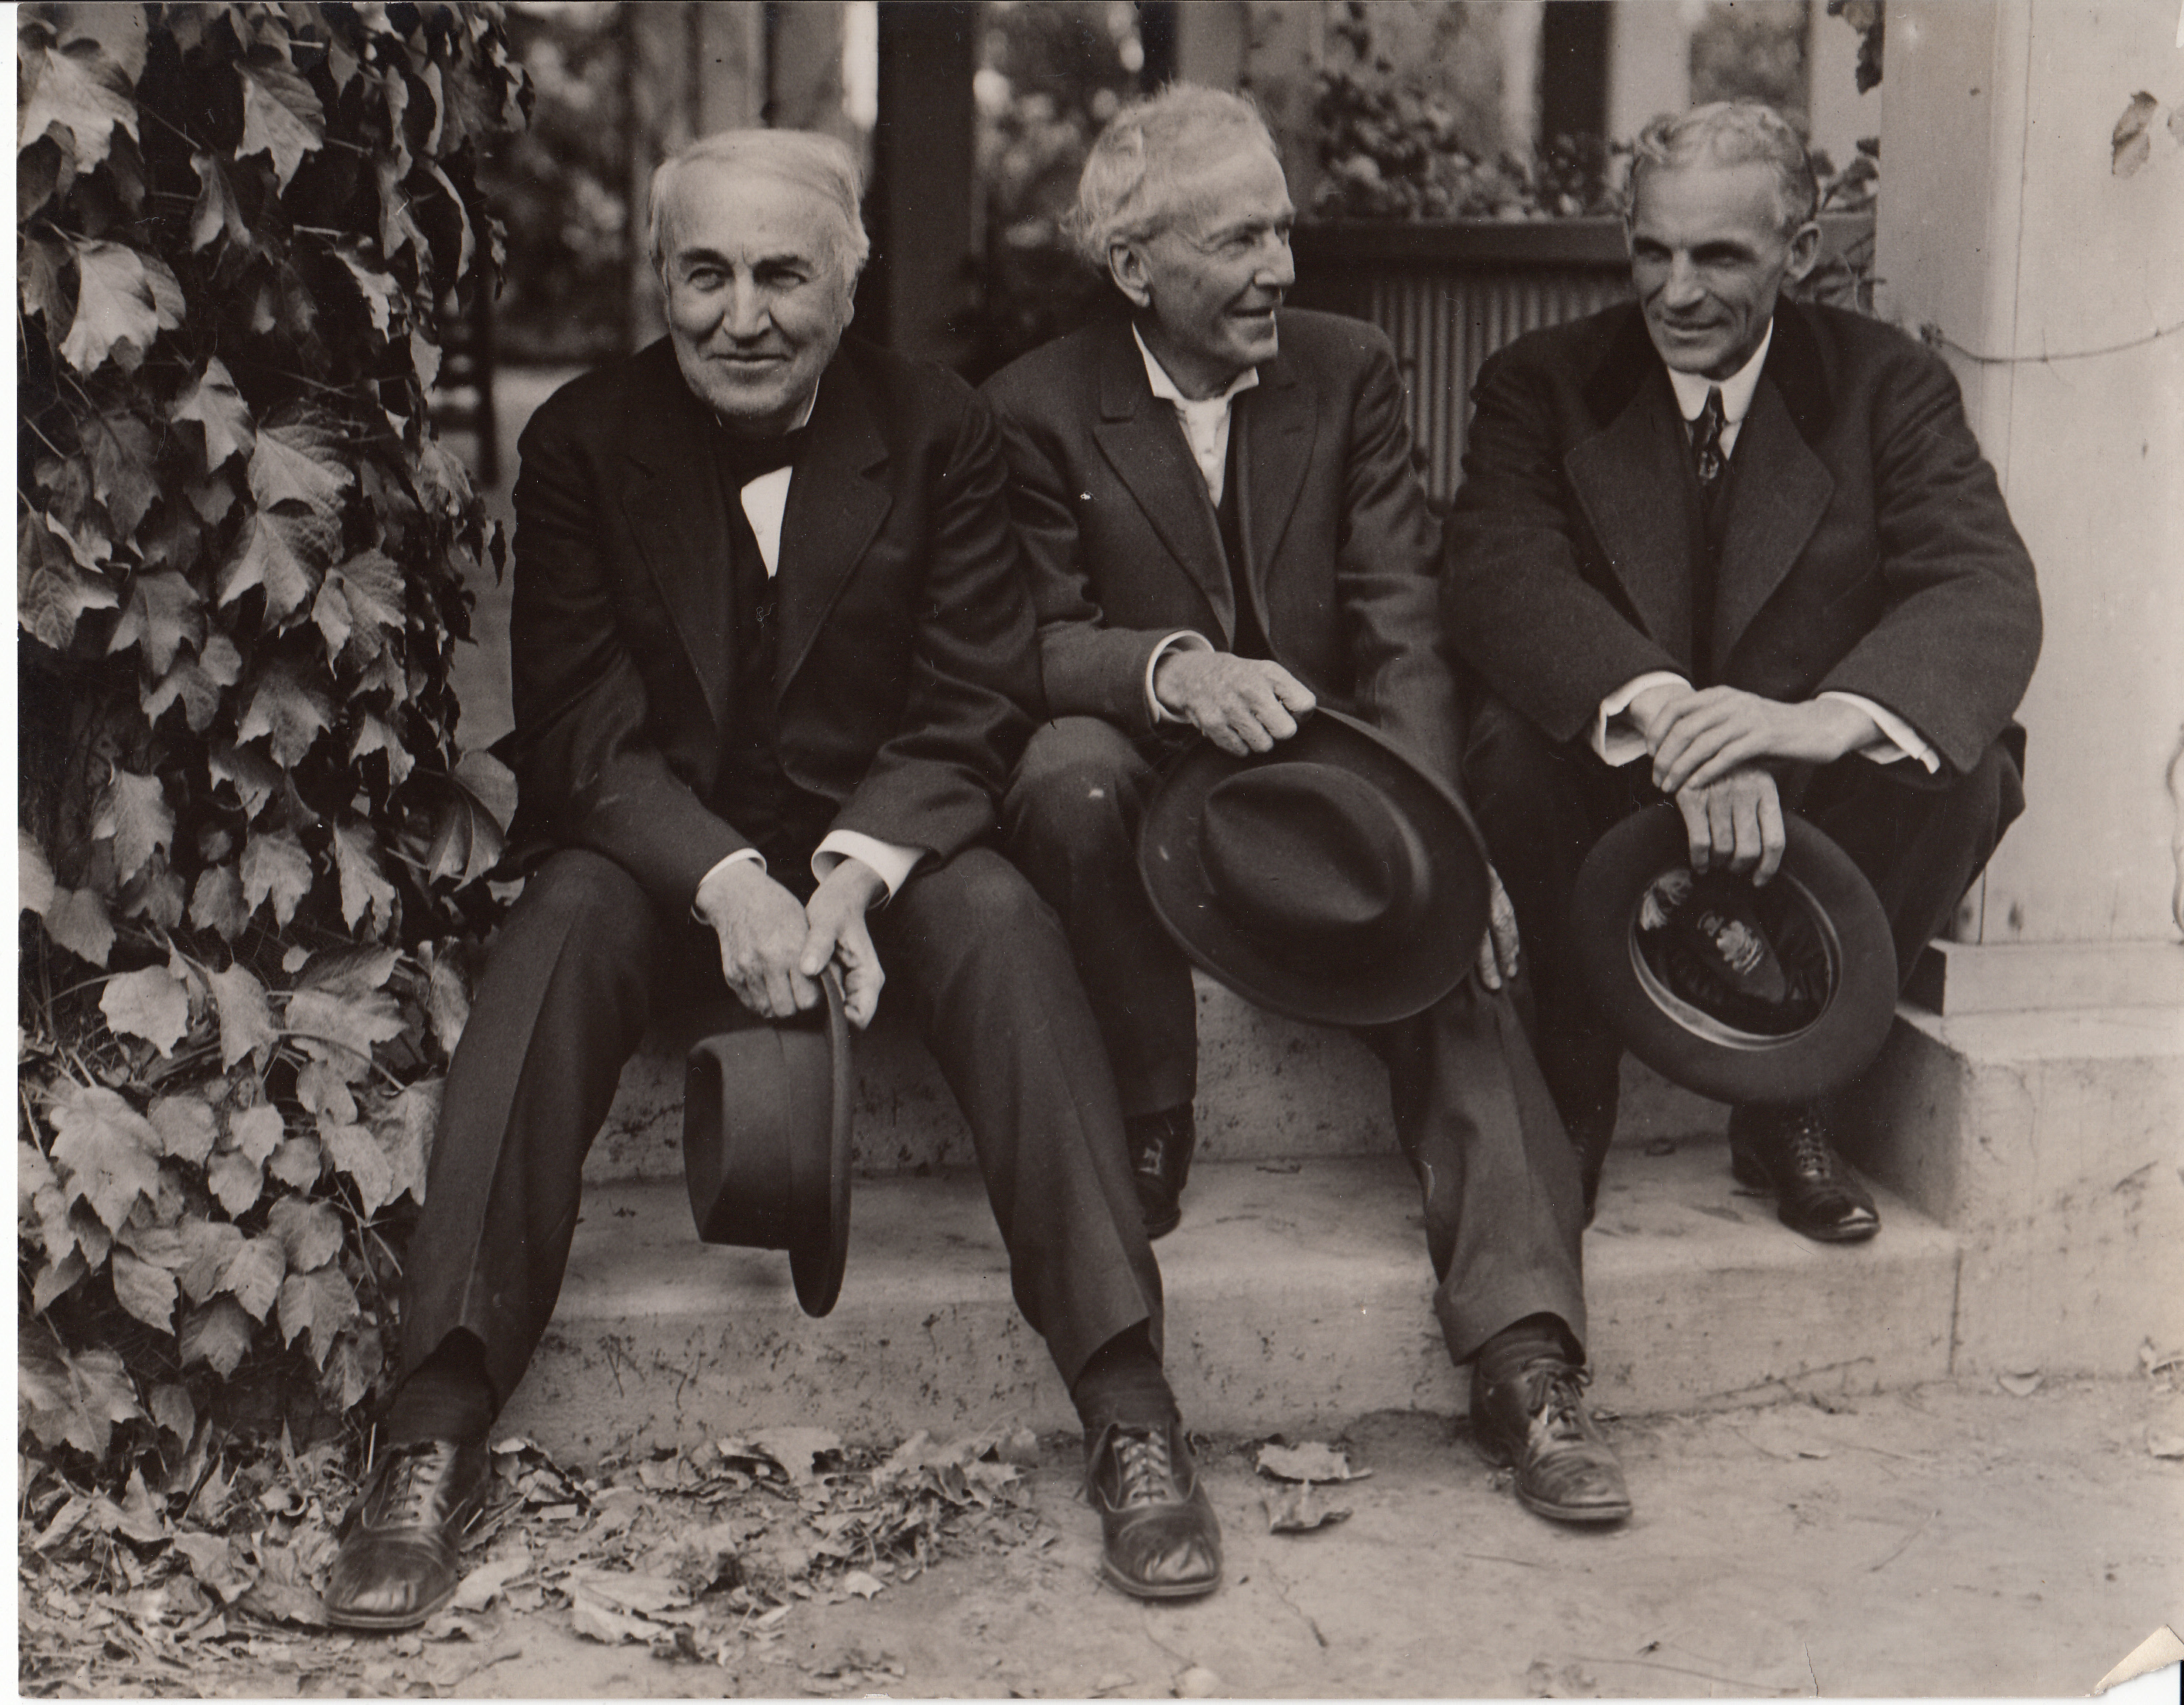 Thomas Edison, Luther Burbank, and Henry Ford on California trip.